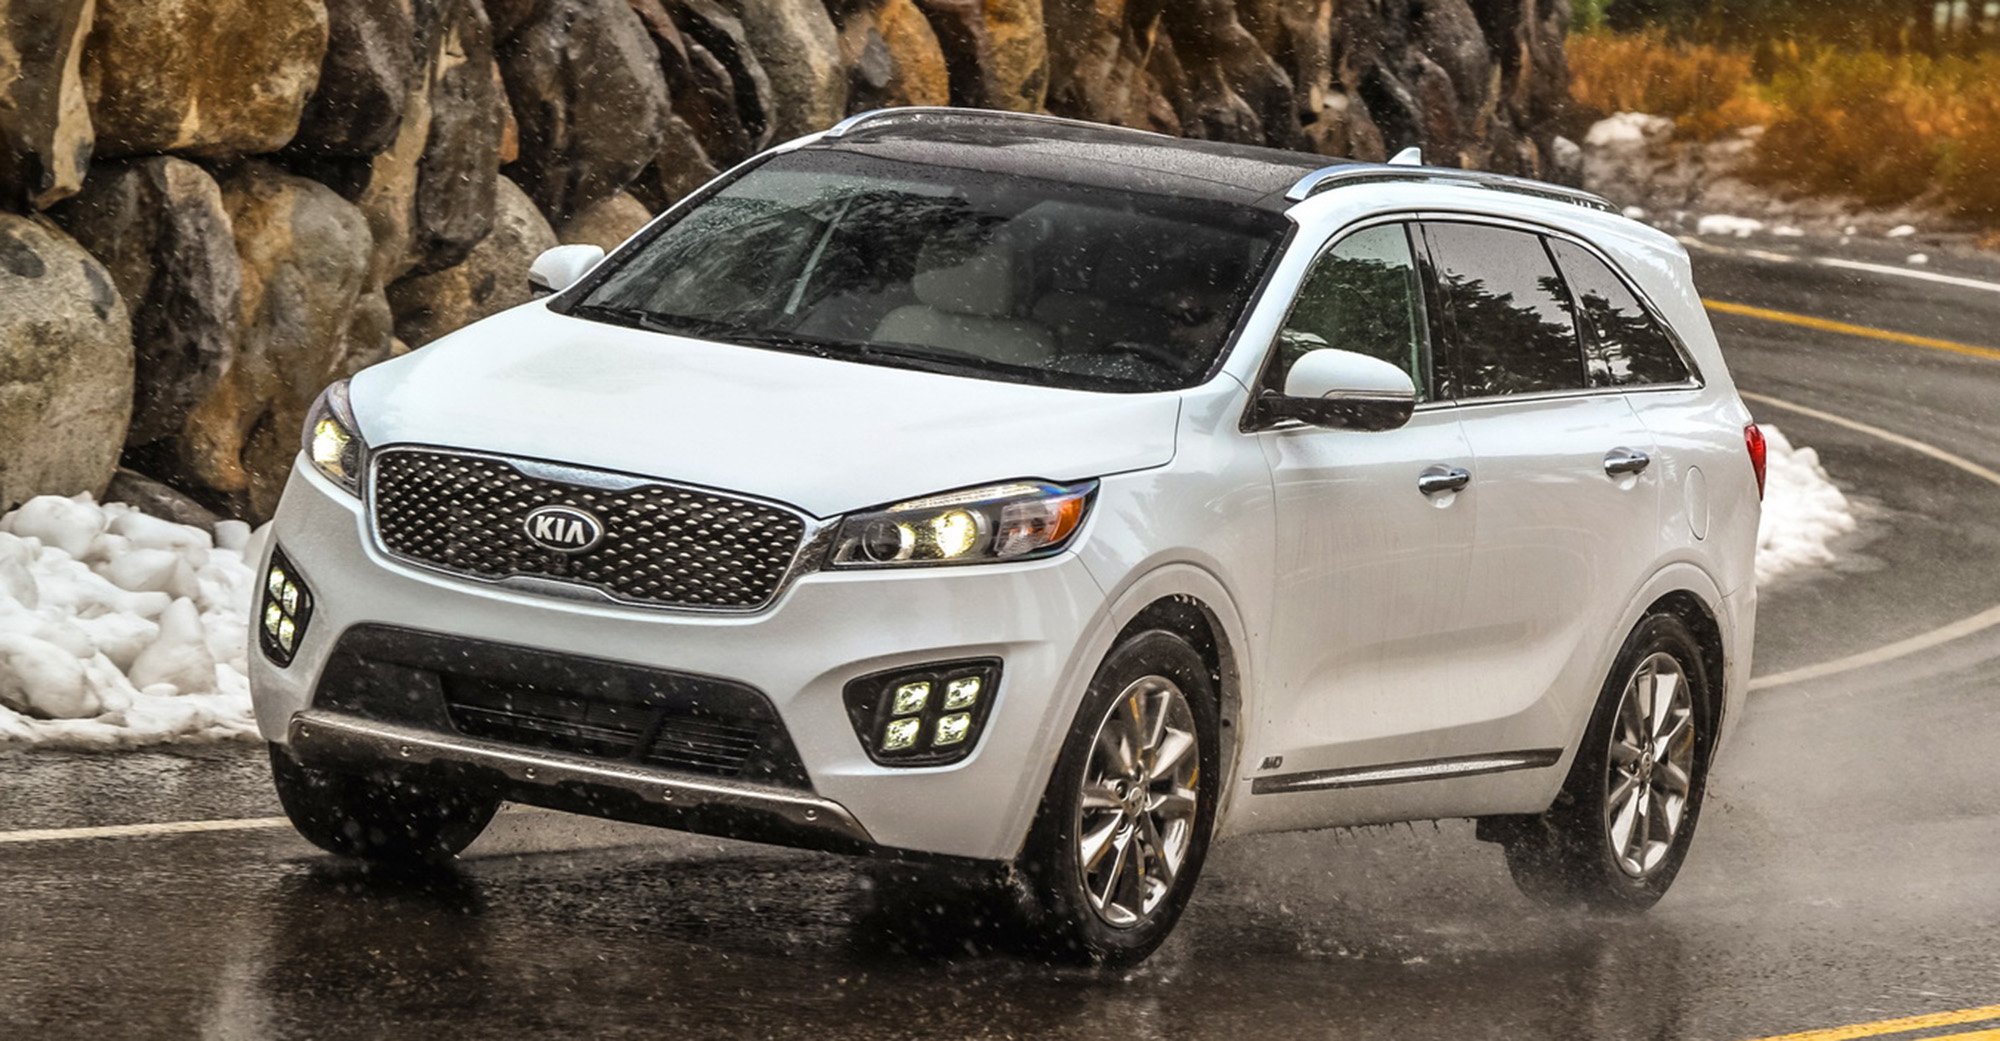 2017 Kia Sorento adds safety features, Apple CarPlay and